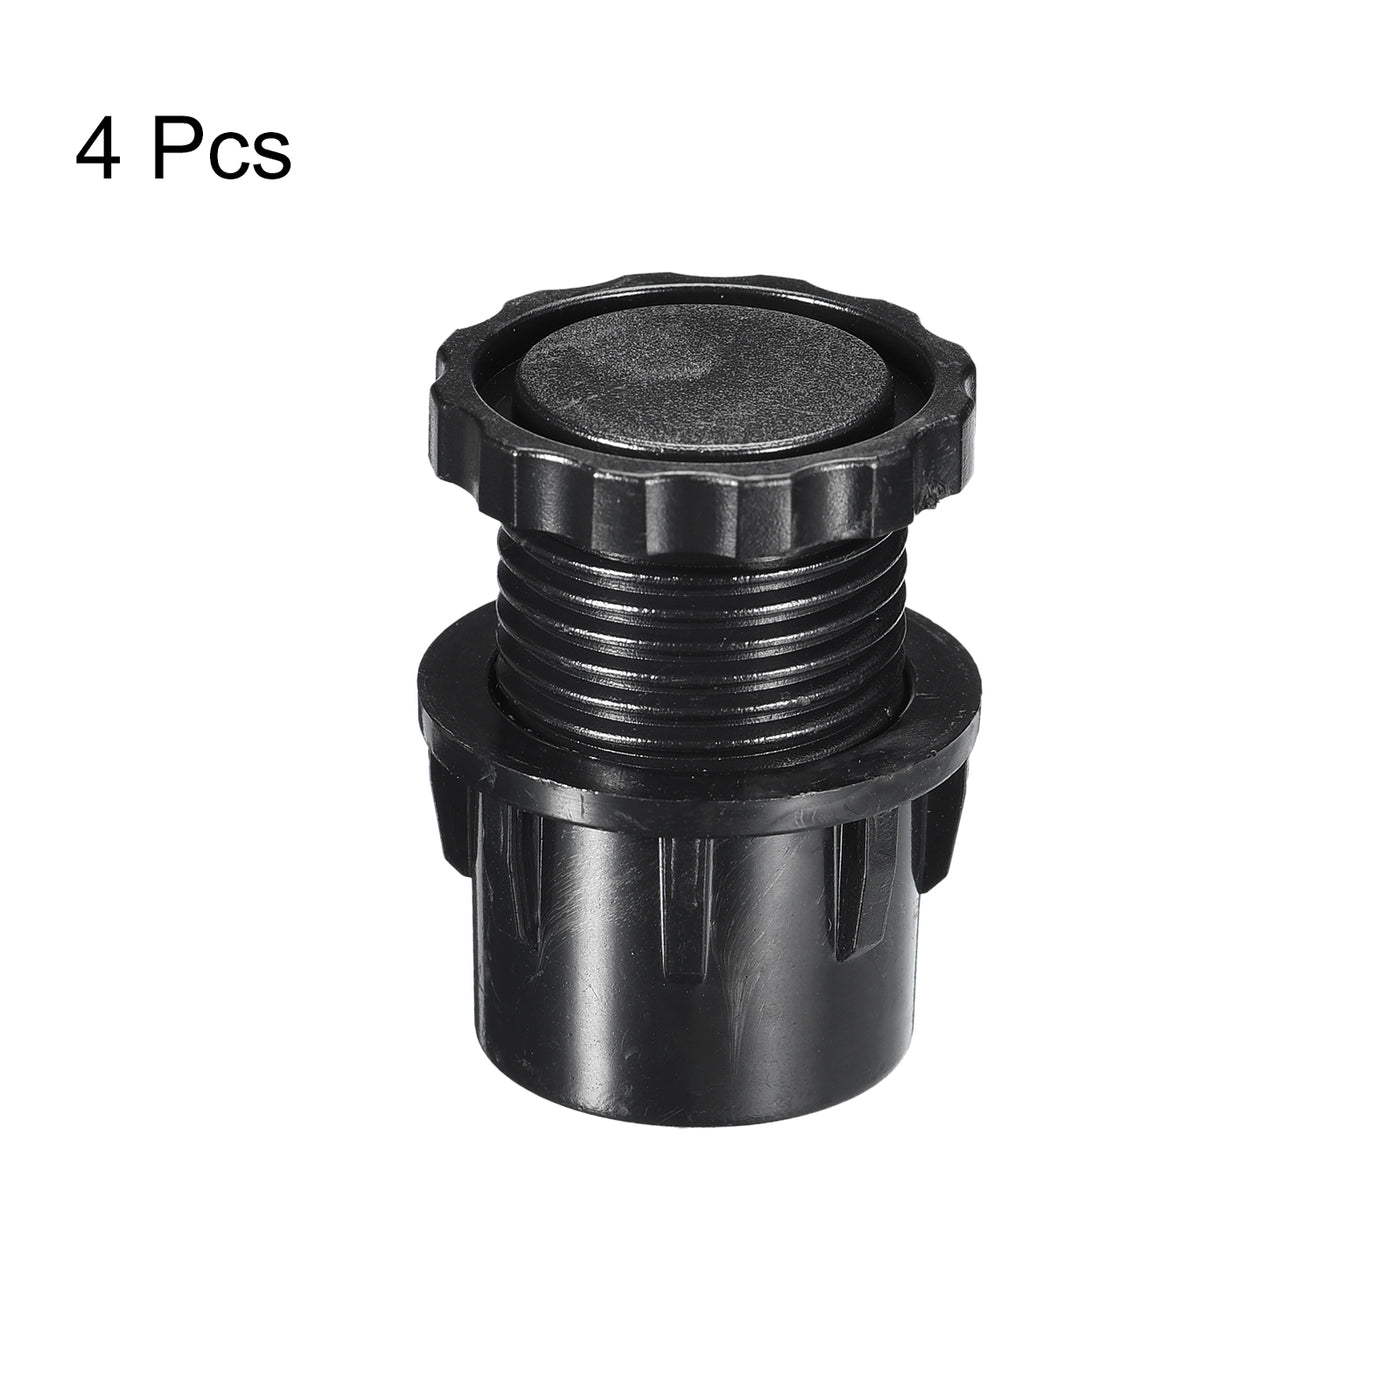 uxcell Uxcell 4Pcs Inserts for Round Tubes with Leveling Feet, for 40mm/1.57" Dia Round Tube